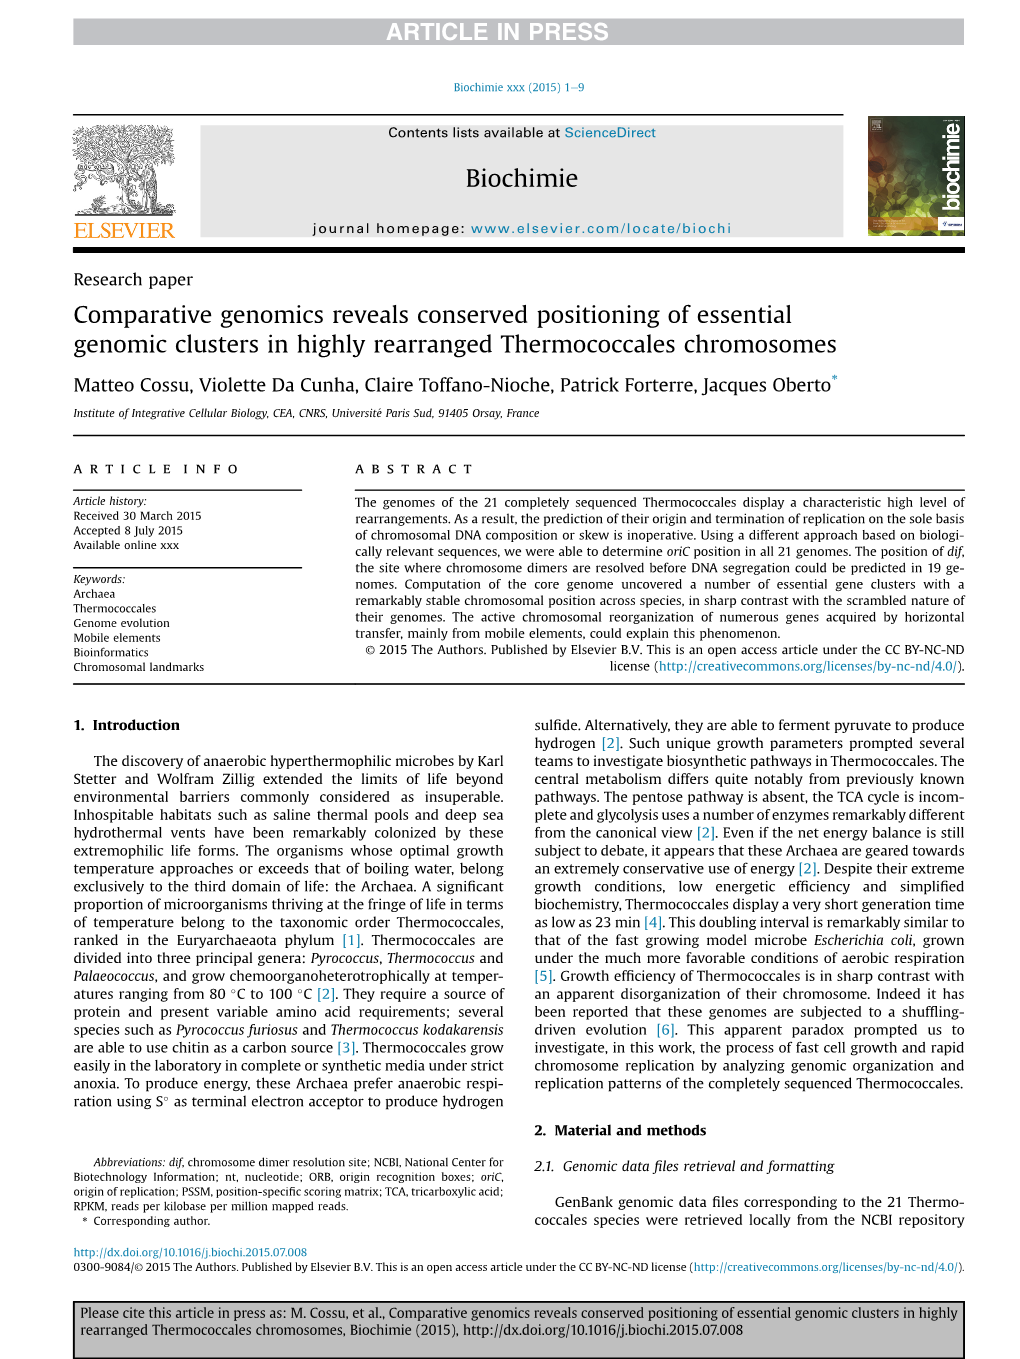 Comparative Genomics Reveals Conserved Positioning of Essential Genomic Clusters in Highly Rearranged Thermococcales Chromosomes